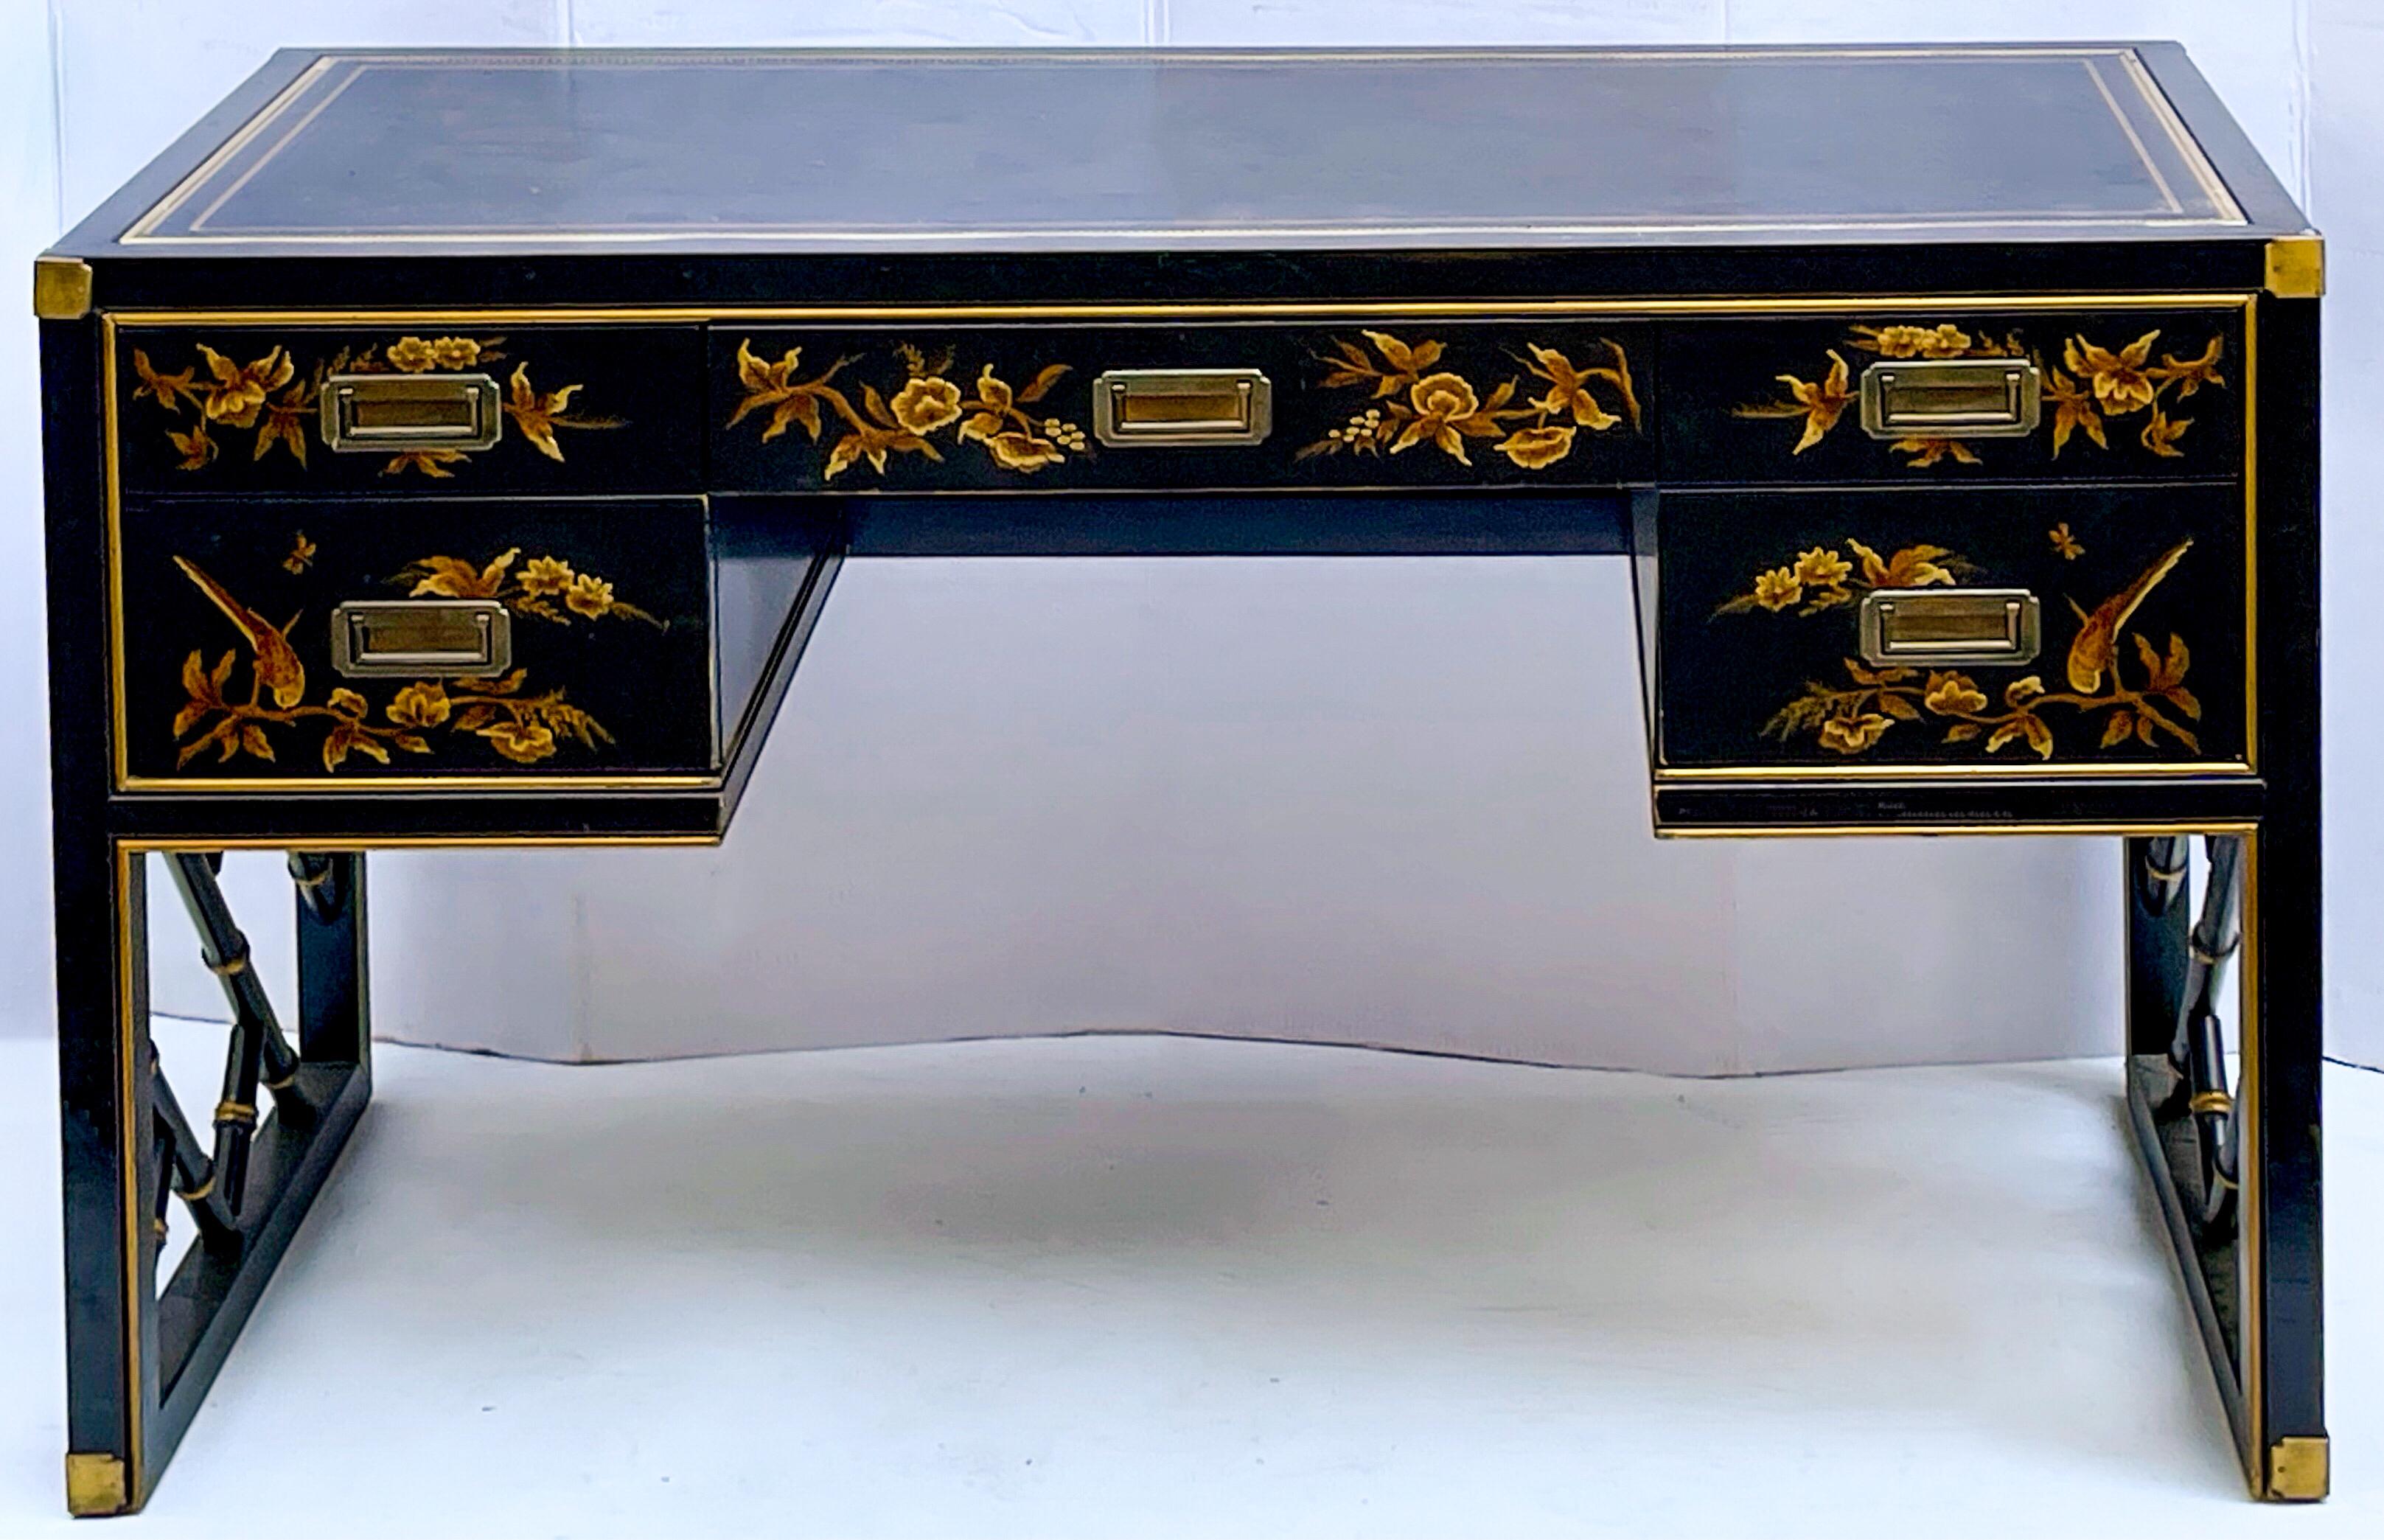 Love this! This is a leather top desk by Sligh Furniture that combines chinoiserie and campaign styling to make a bold statement piece! It is marked and in very good condition. The desk can float in a room as it is painted on all sides.